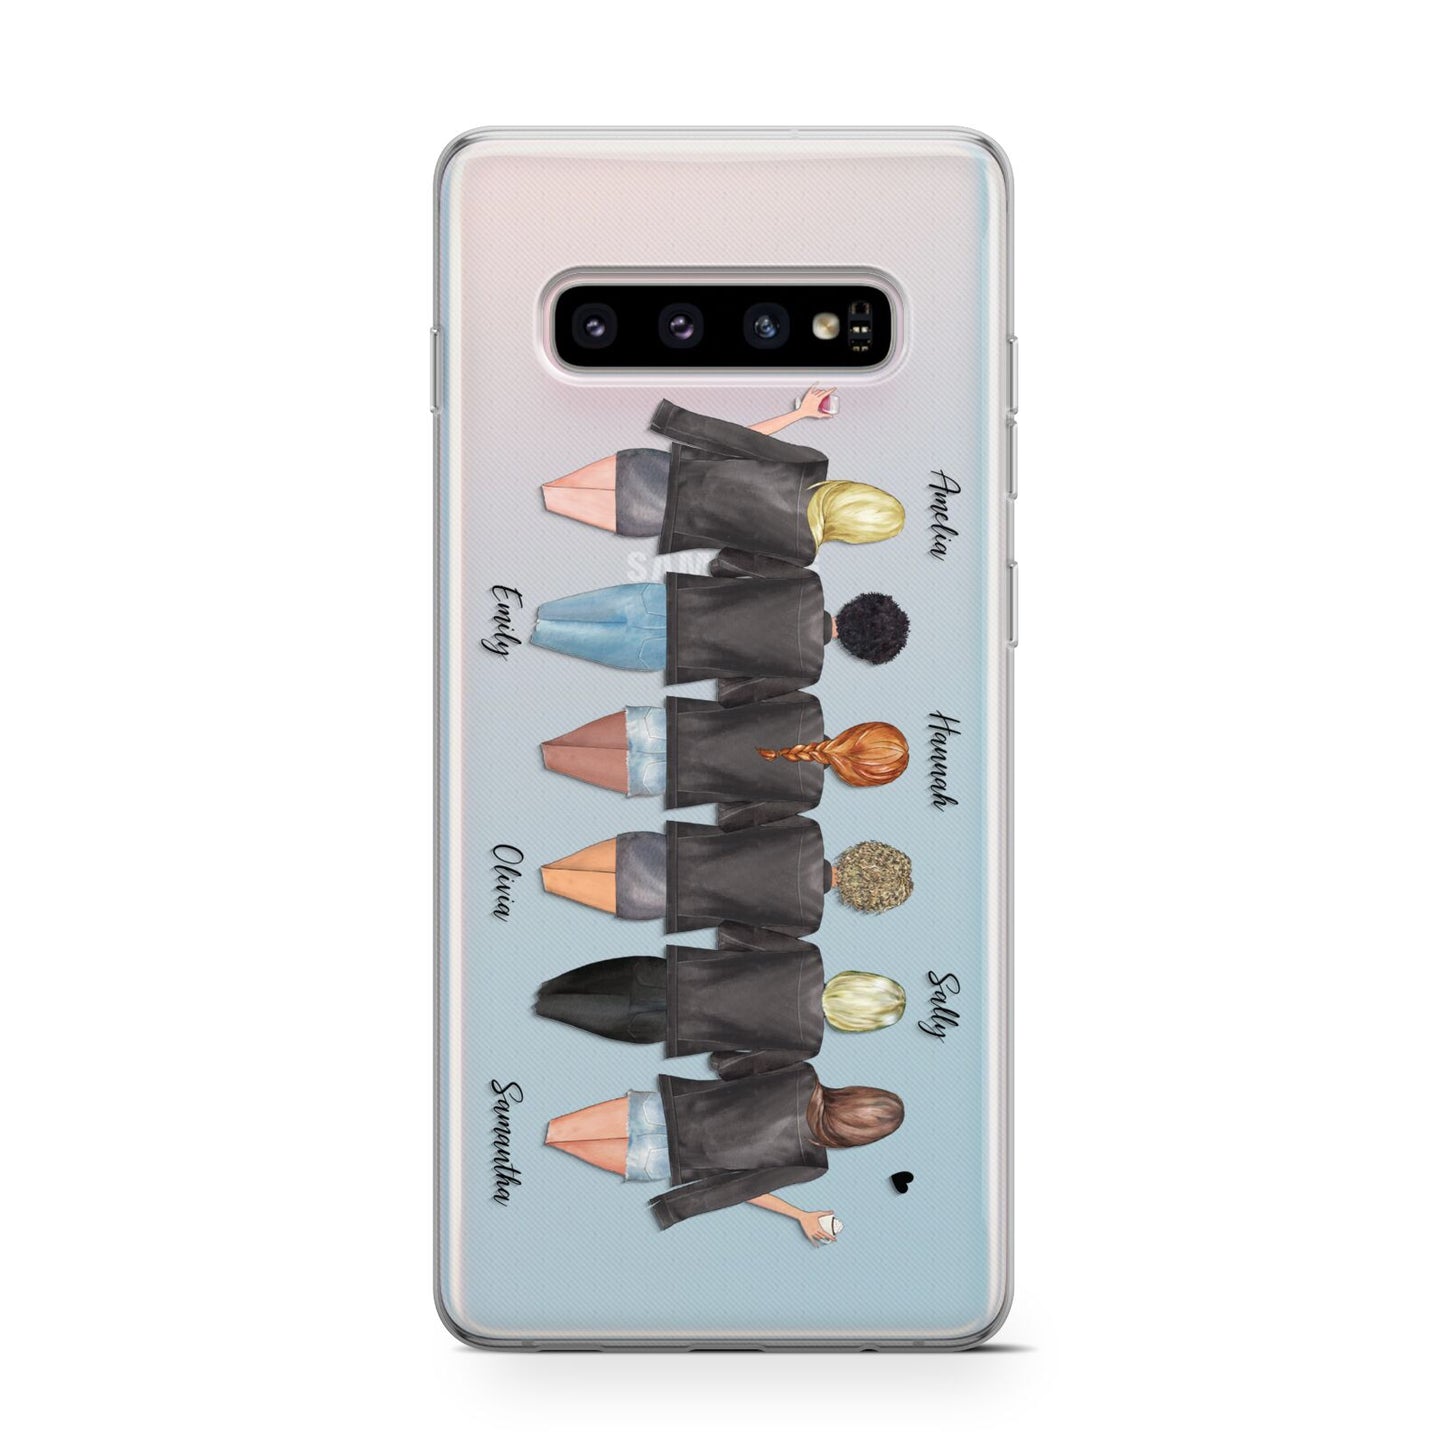 6 Best Friends with Names Samsung Galaxy S10 Case